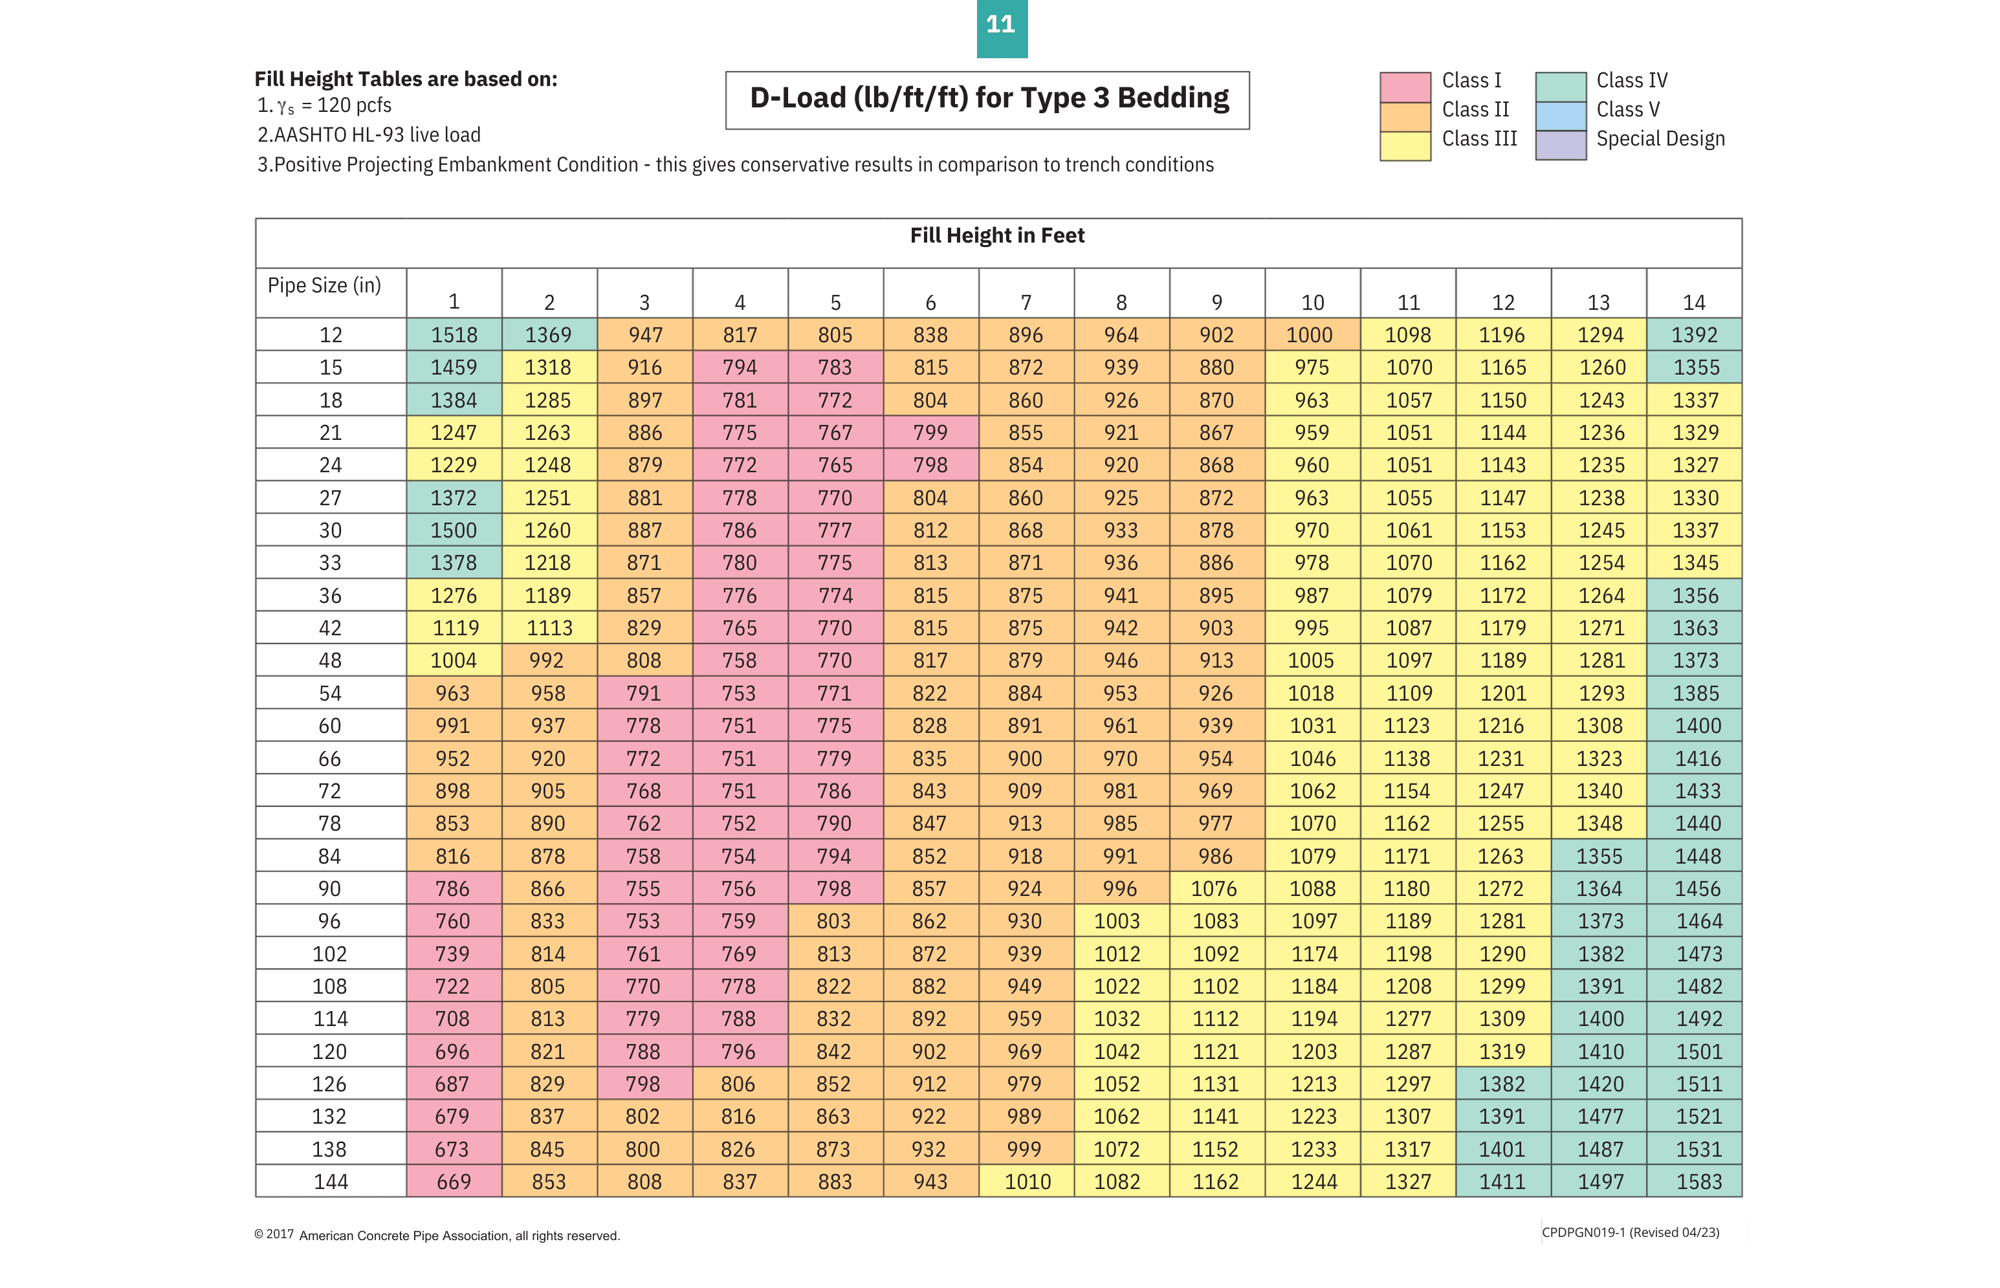 Fill Height Table-Page 11